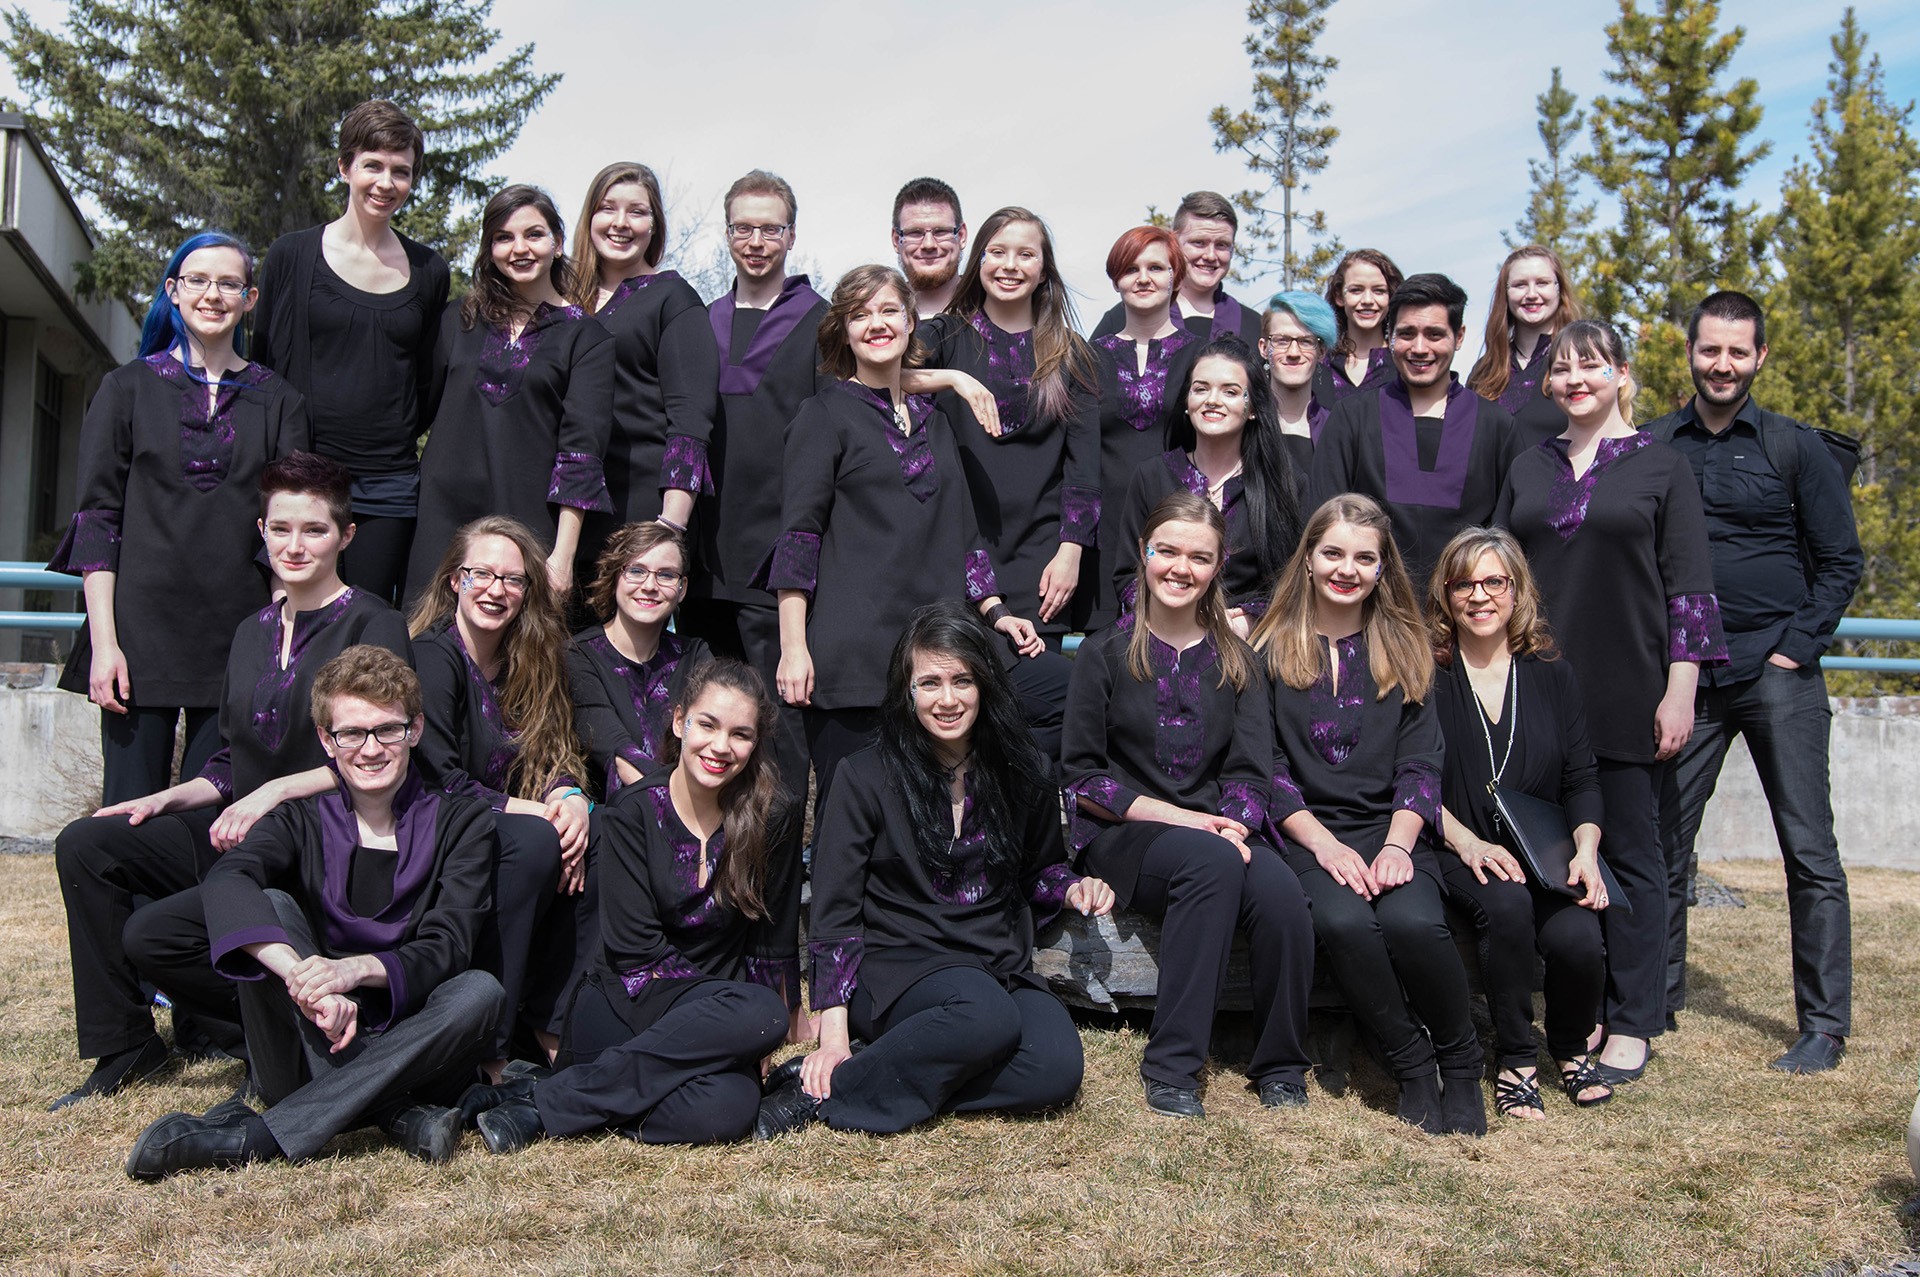 SPRING SHOW - Pictured here is the ihana Youth Choir which will be performing May 5th at the First Christian Reformed Church. Also set to perform are Brioso (a children’s choir) and Soliloquy (a mixed adult chorus).